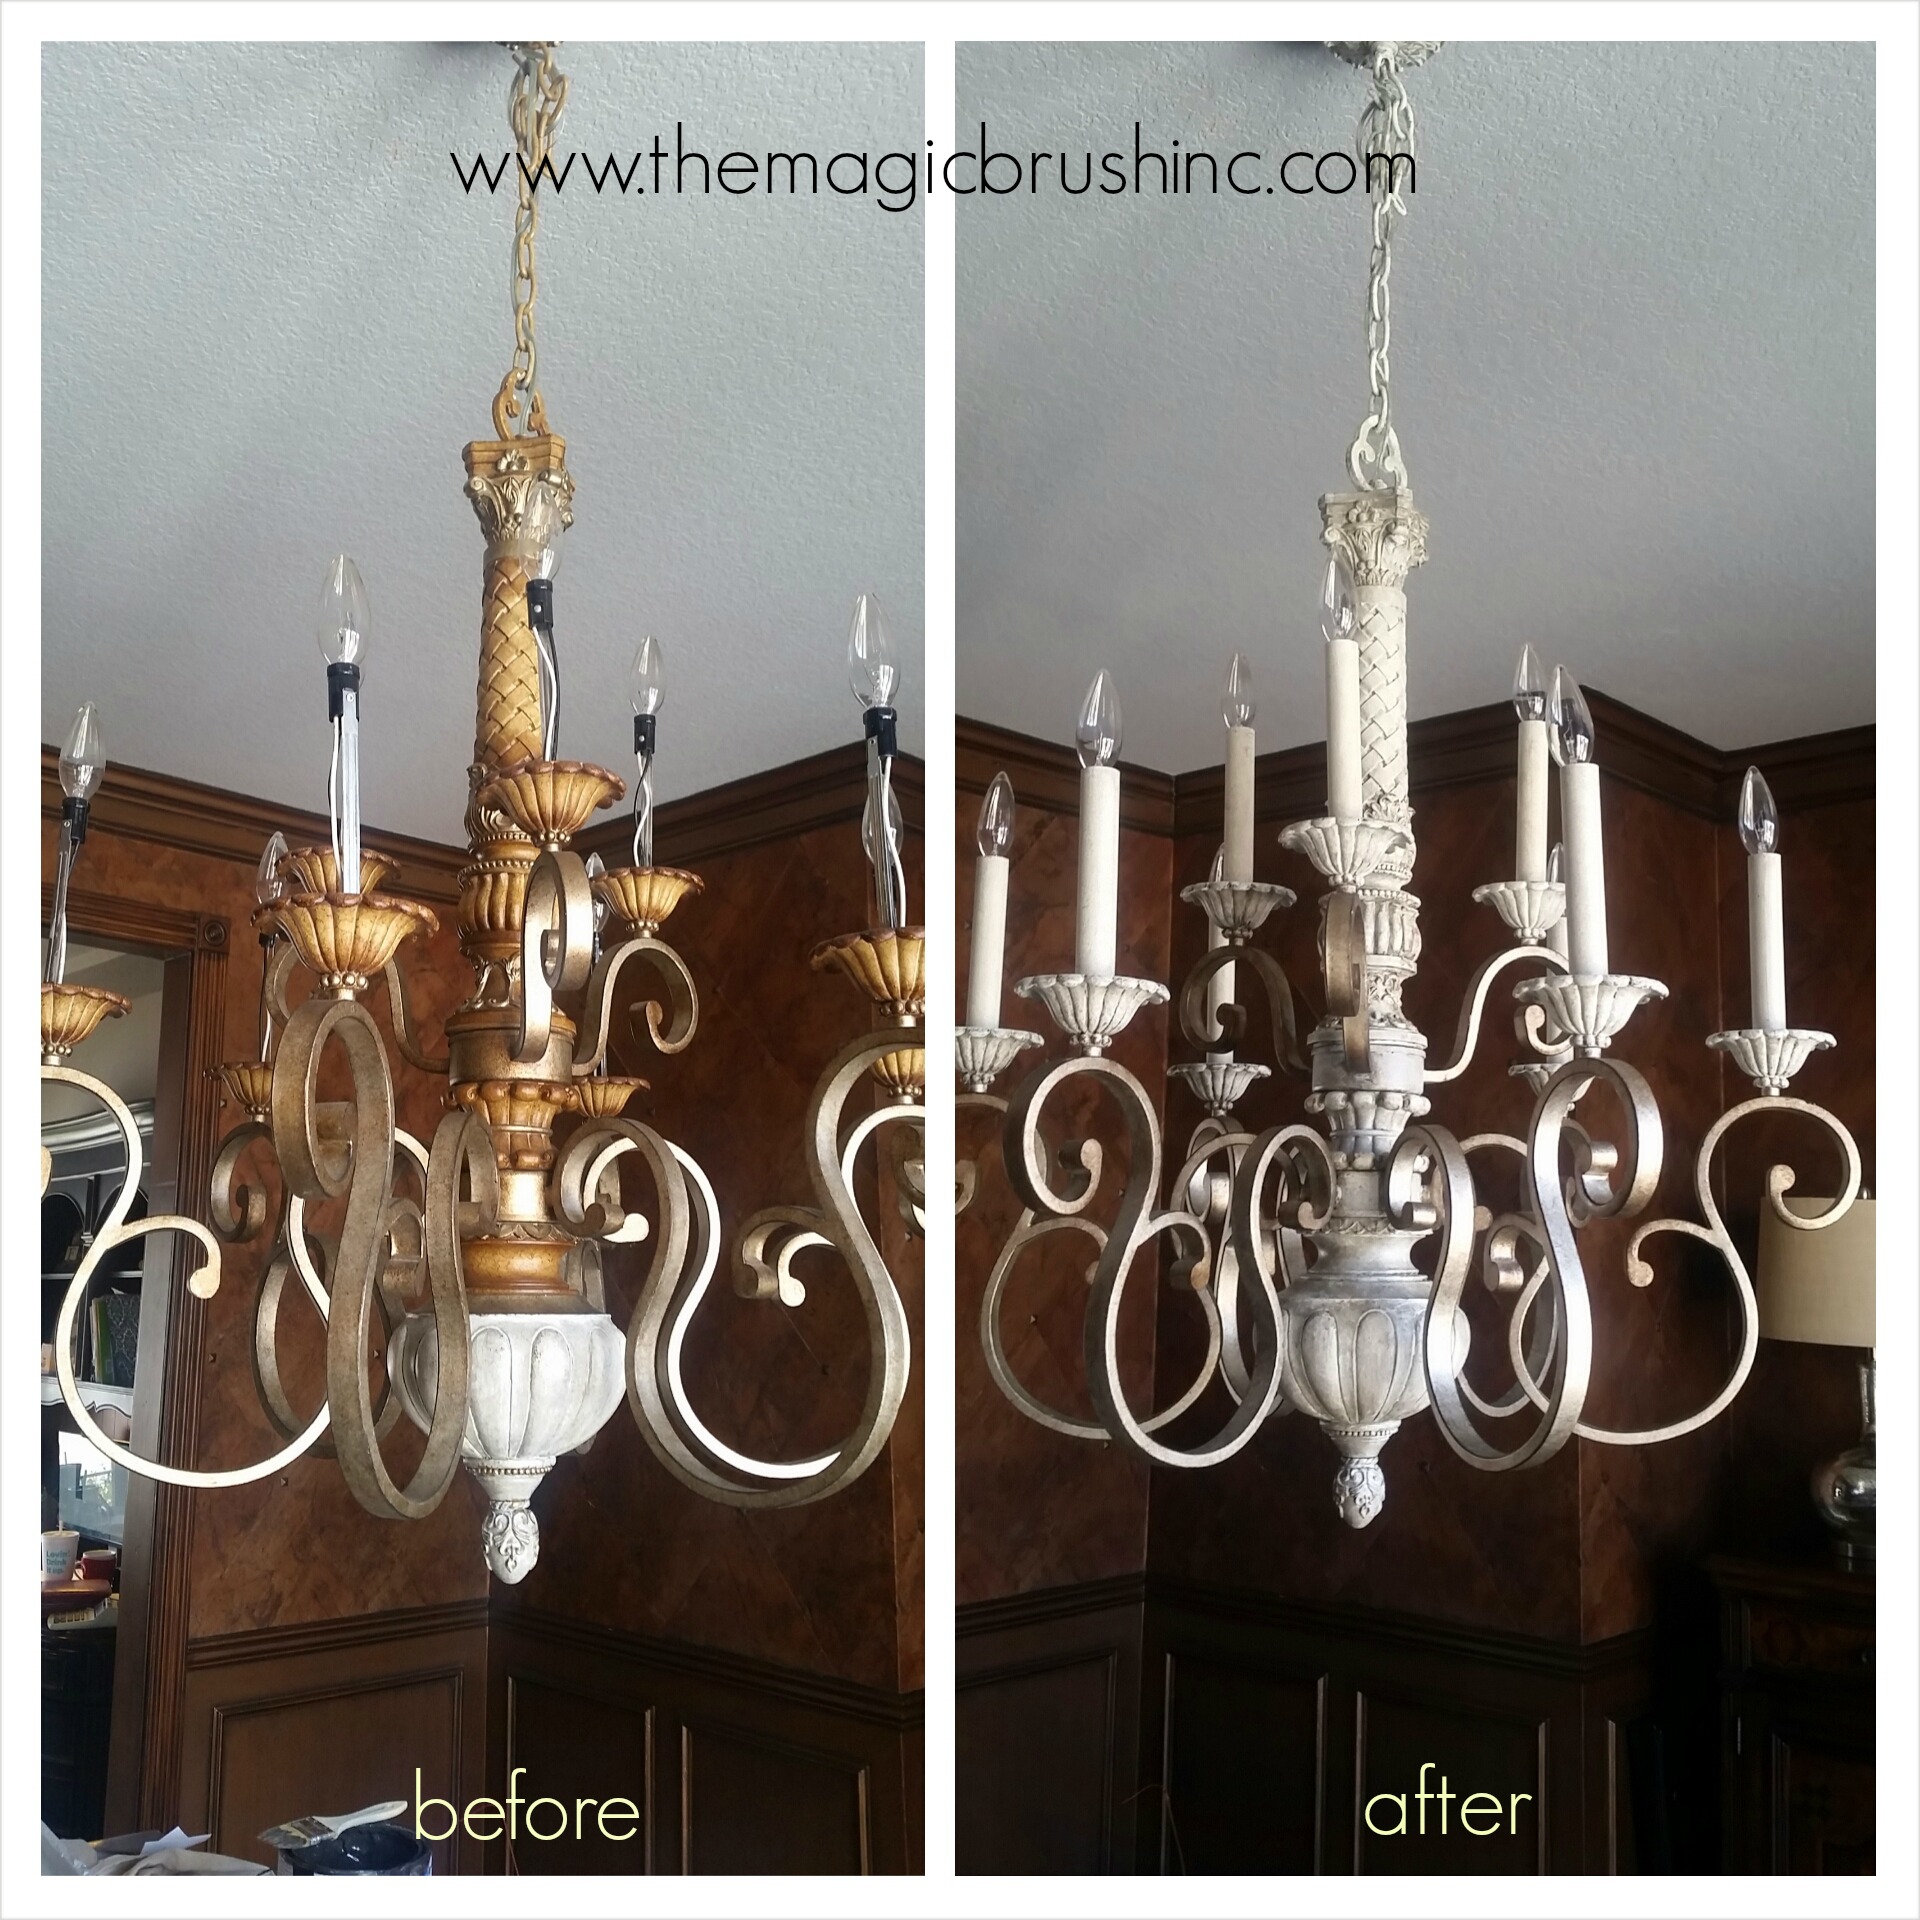 Painting Light Fixtures And Chandeliers, How To Paint Old Chandelier